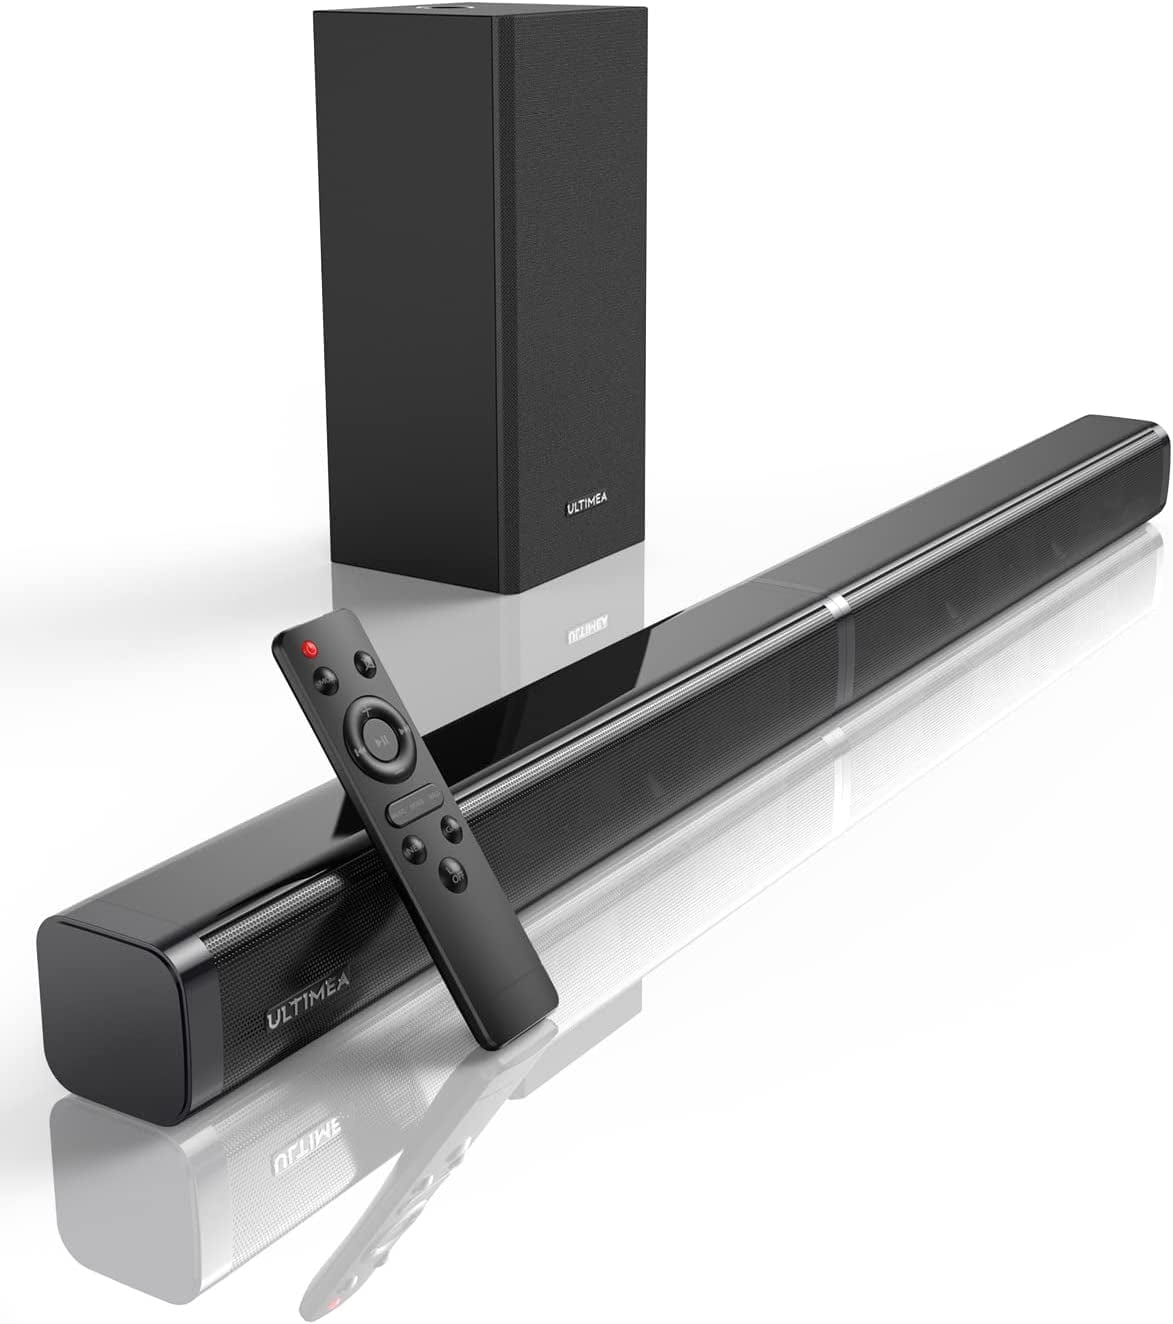 Bomaker 2.1 Channel TV Wired Sound Bar with Subwoofer, 100W Sound Bars for TV, LED Display Off, 110dB, 5 EQ Modes, Bass Adjustable Surround Sound, 4K & HD TV, Optical/AUX/USB Connection